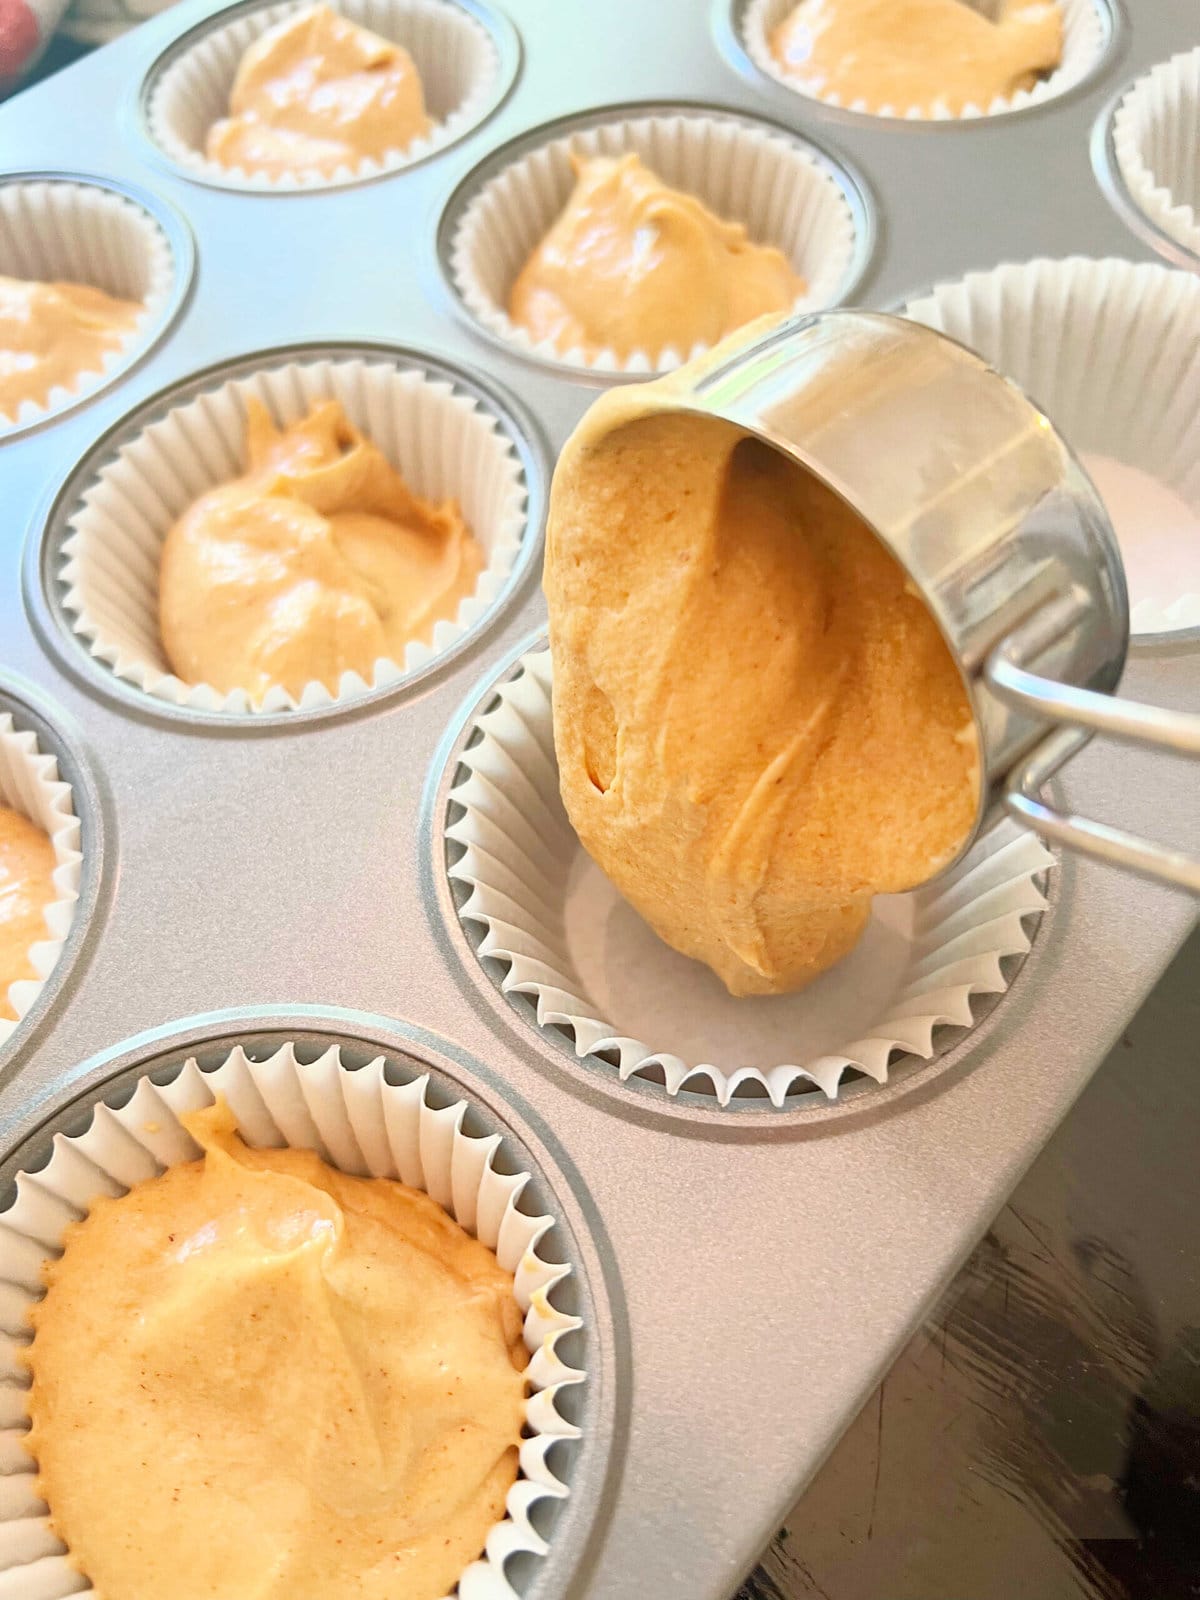 Filling the cupcake liners with sweet potato cake batter, using a ¼ measuring cup.